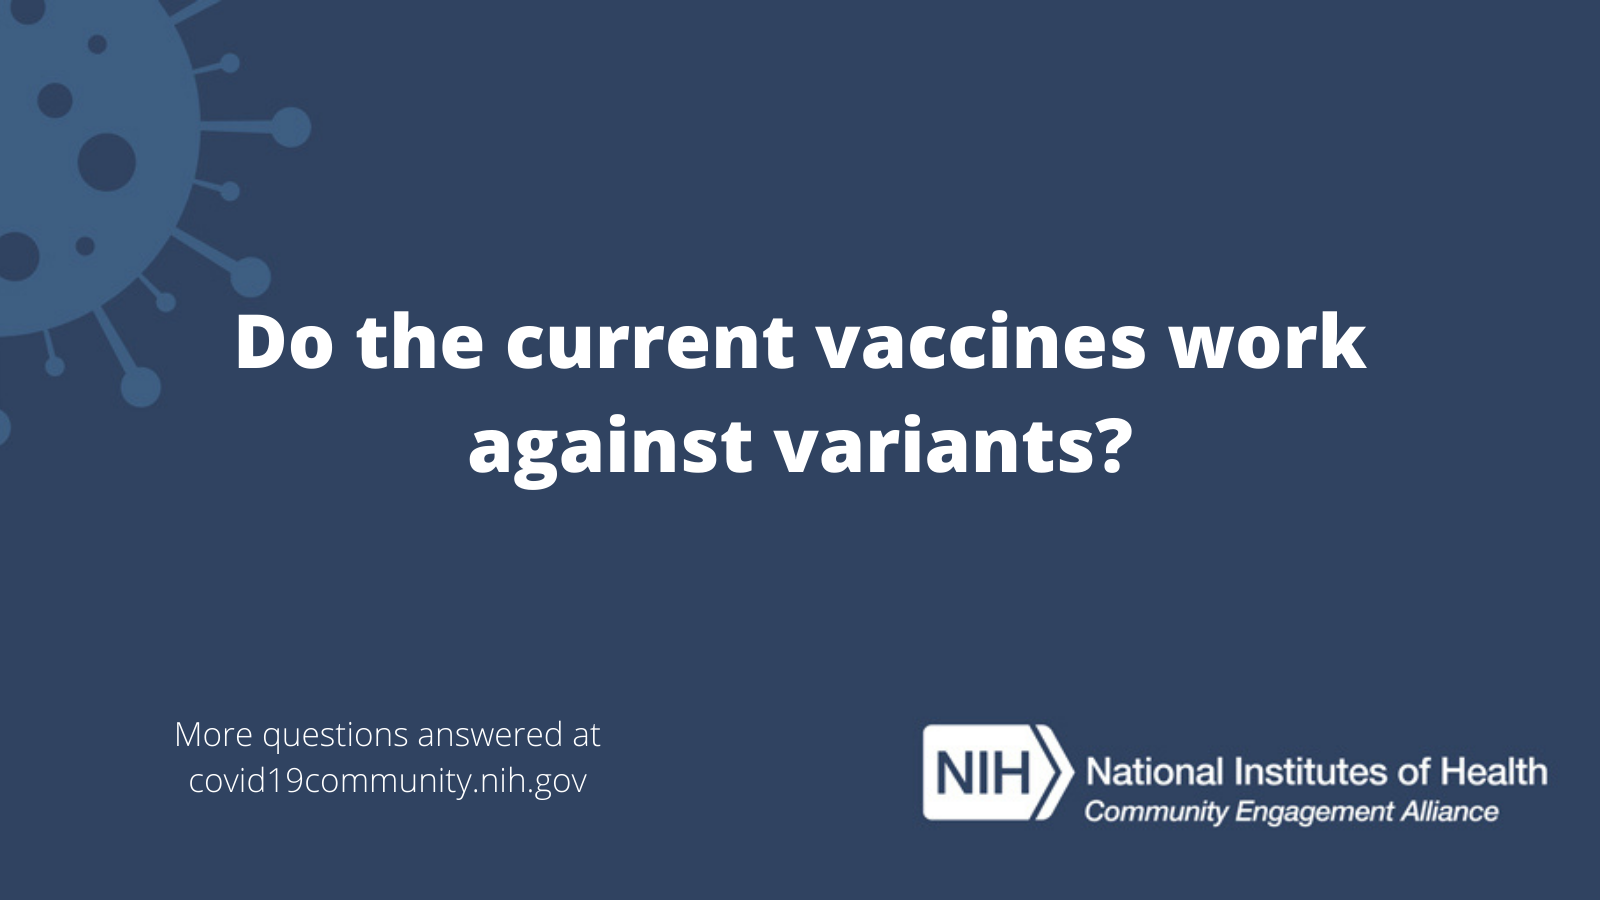 Do the current vaccines work against variants? More vaccine questions answered at covid19community.nih.gov